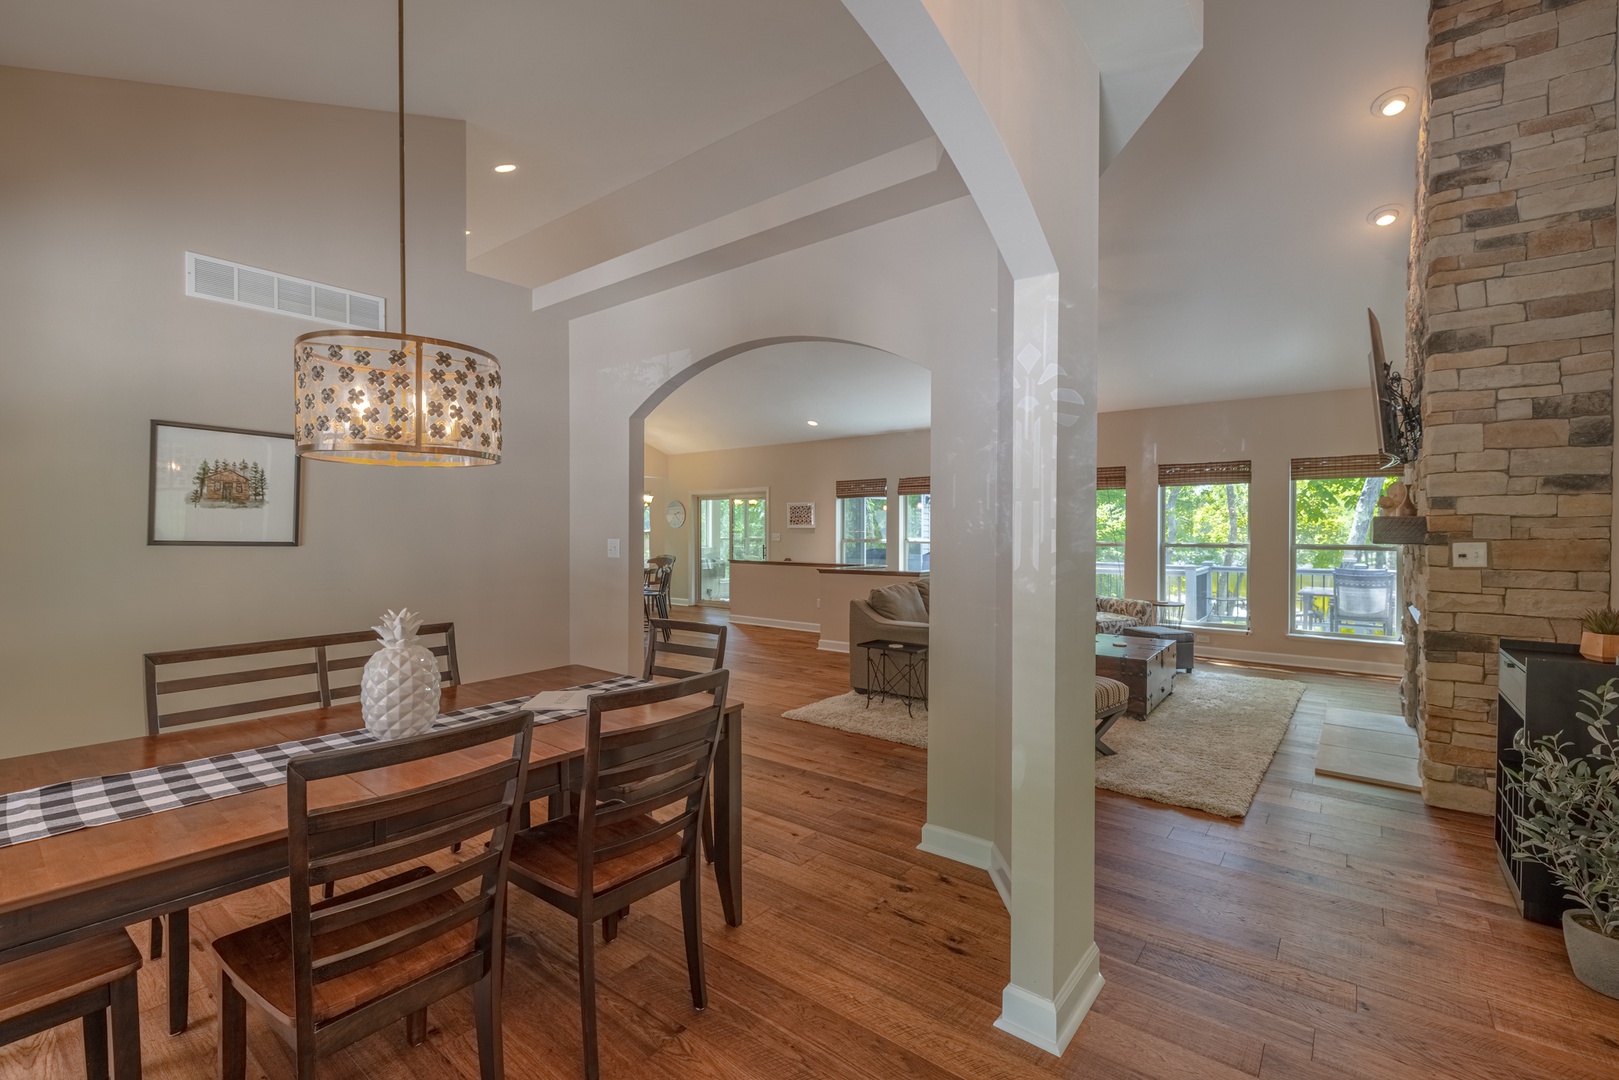 The formal dining room is perfect for family-style meals